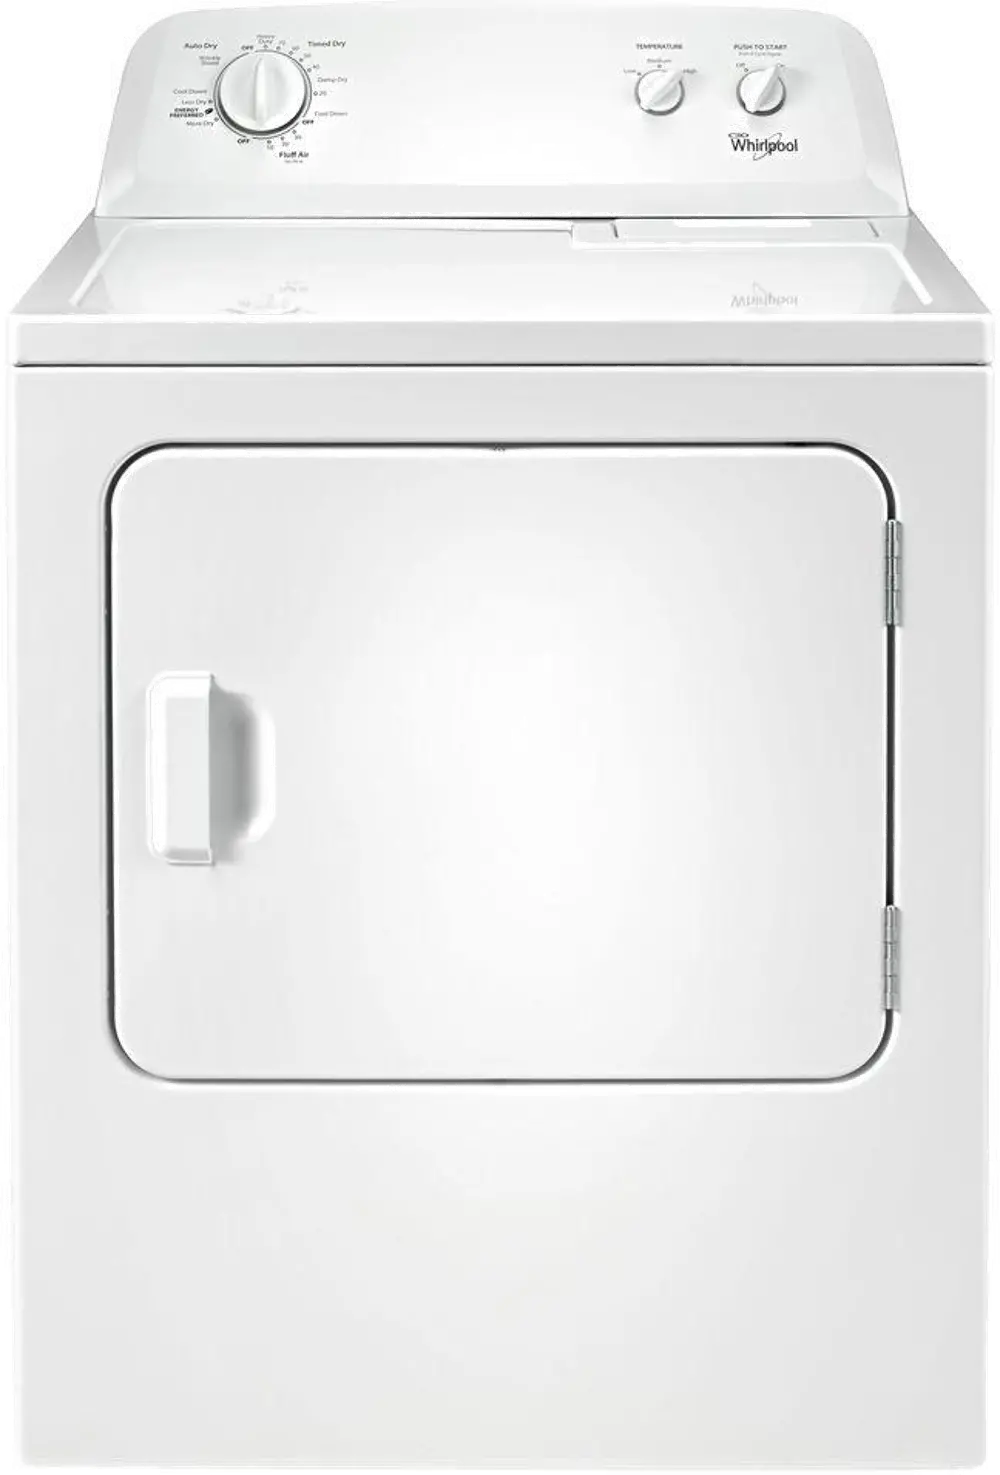 WED4616FW Whirlpool Electric Dryer AutoDry - 7.0 cu. ft. White-1